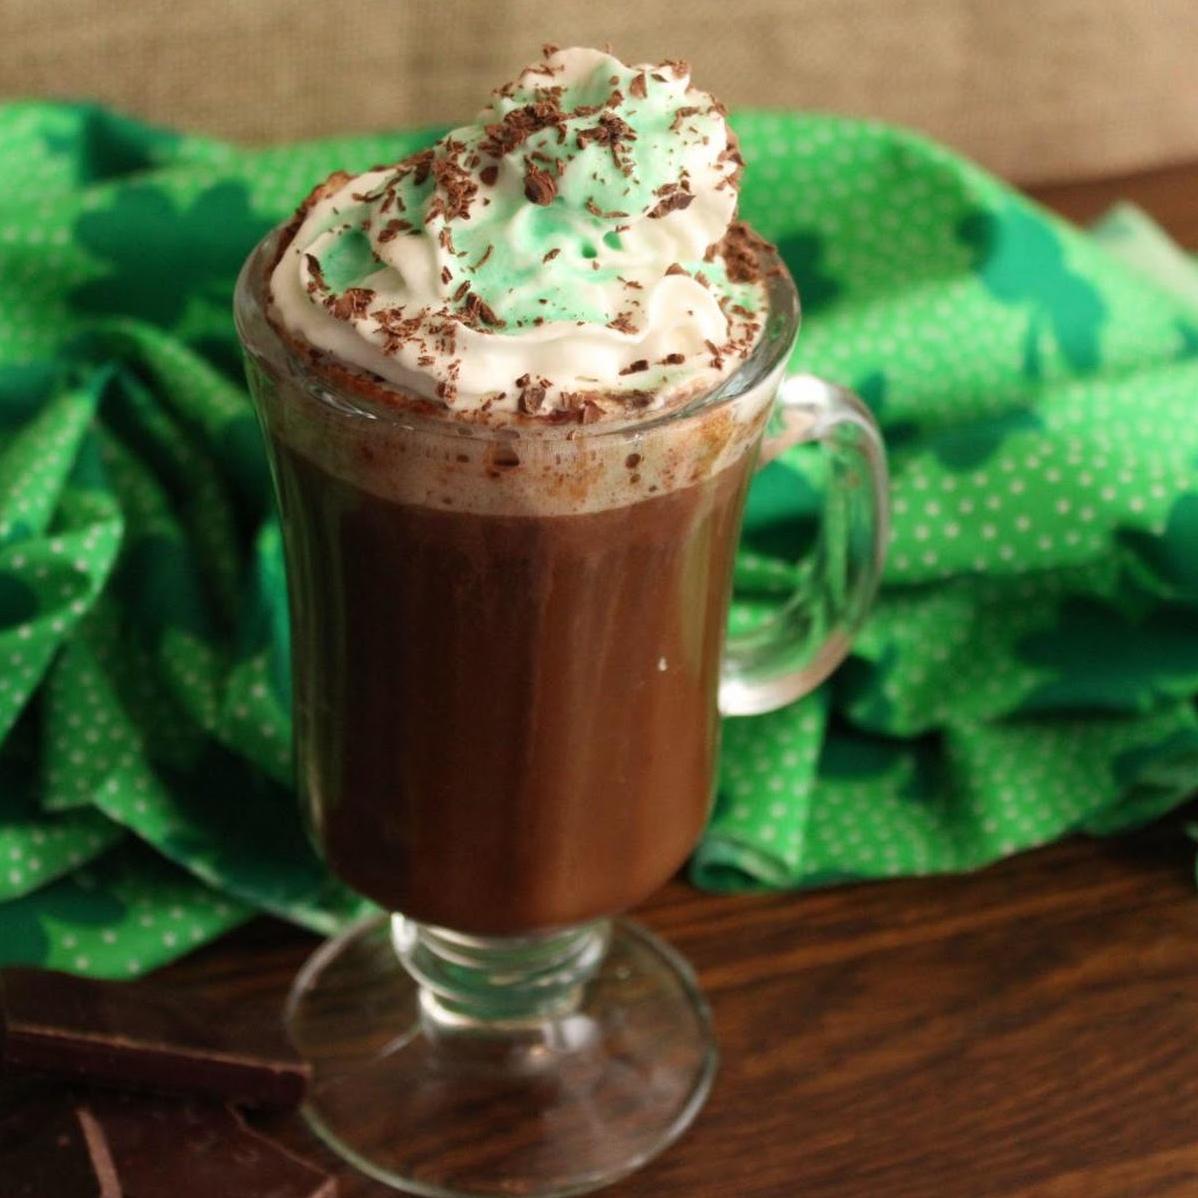  This Chocolatey Irish Coffee recipe will leave you feeling warm, cozy and satisfied.